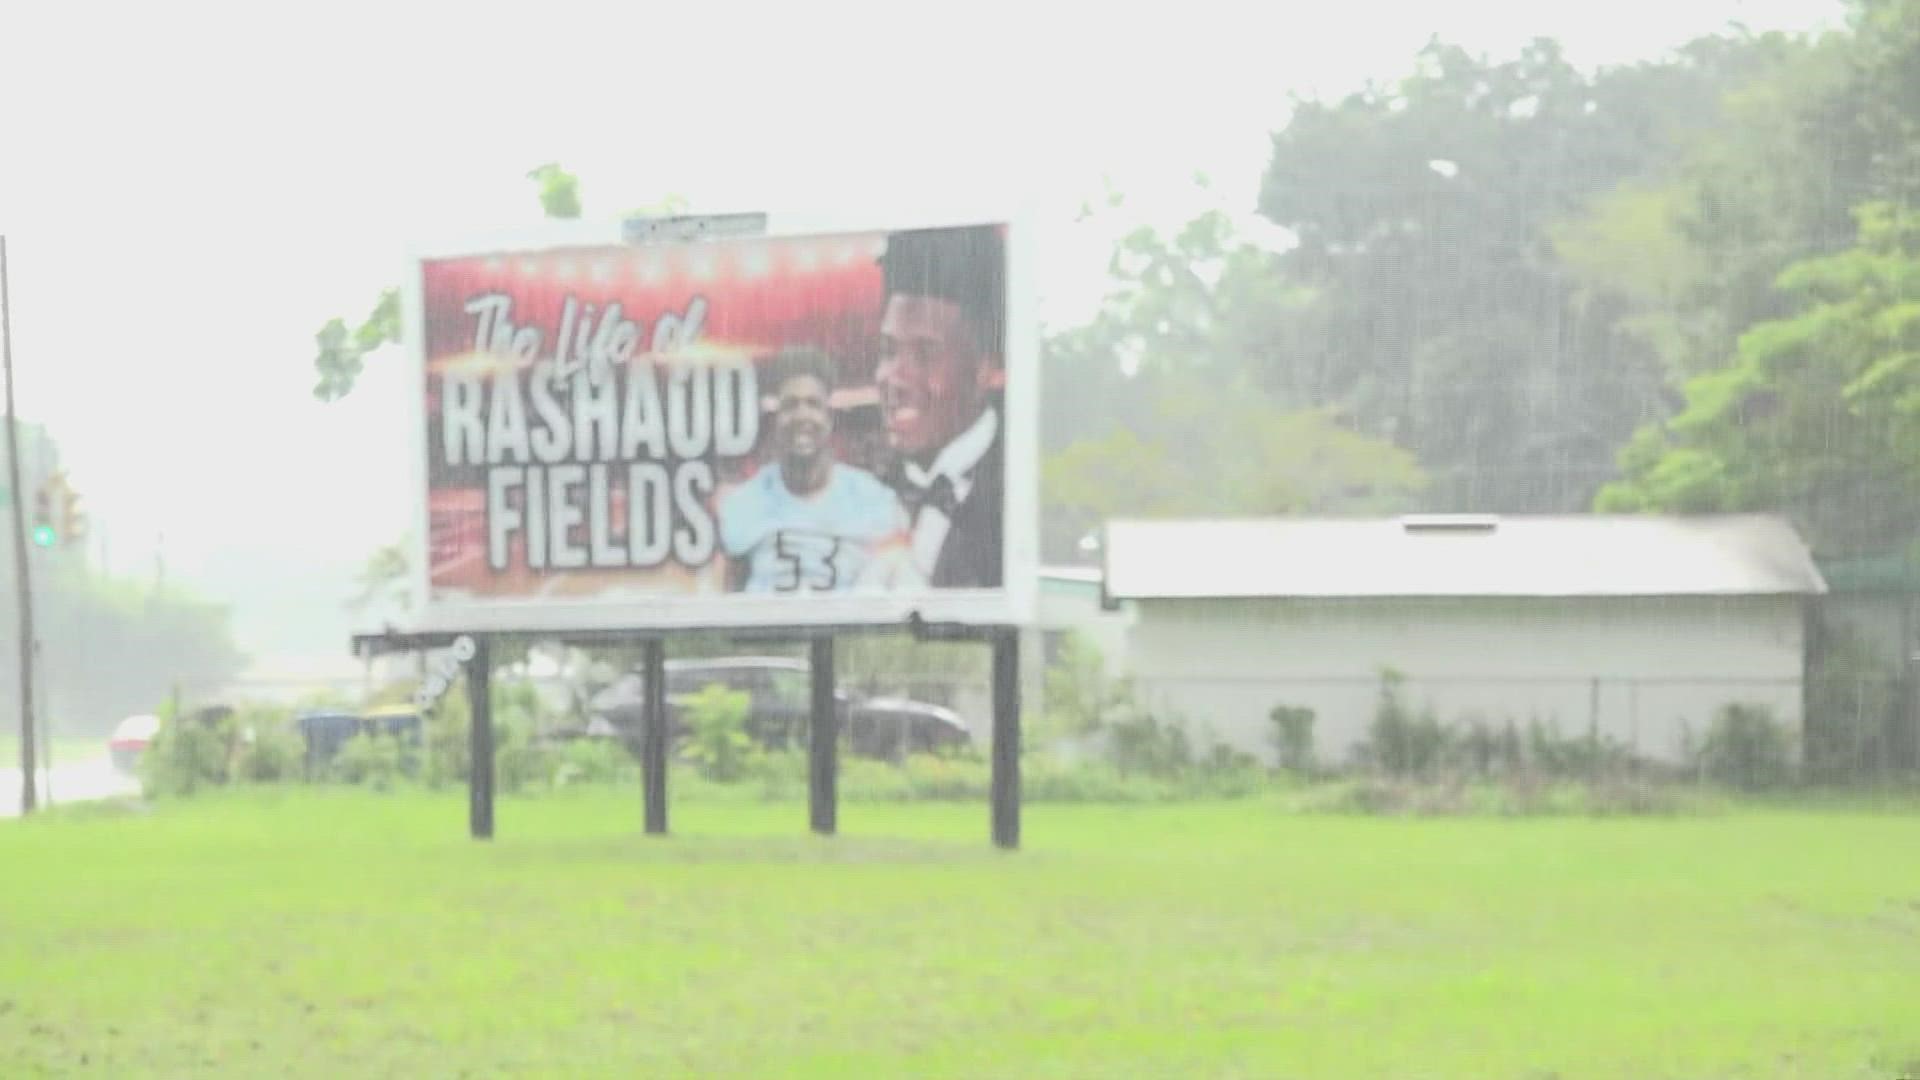 Rashaud Fields was shot just hours after his graduation in may.